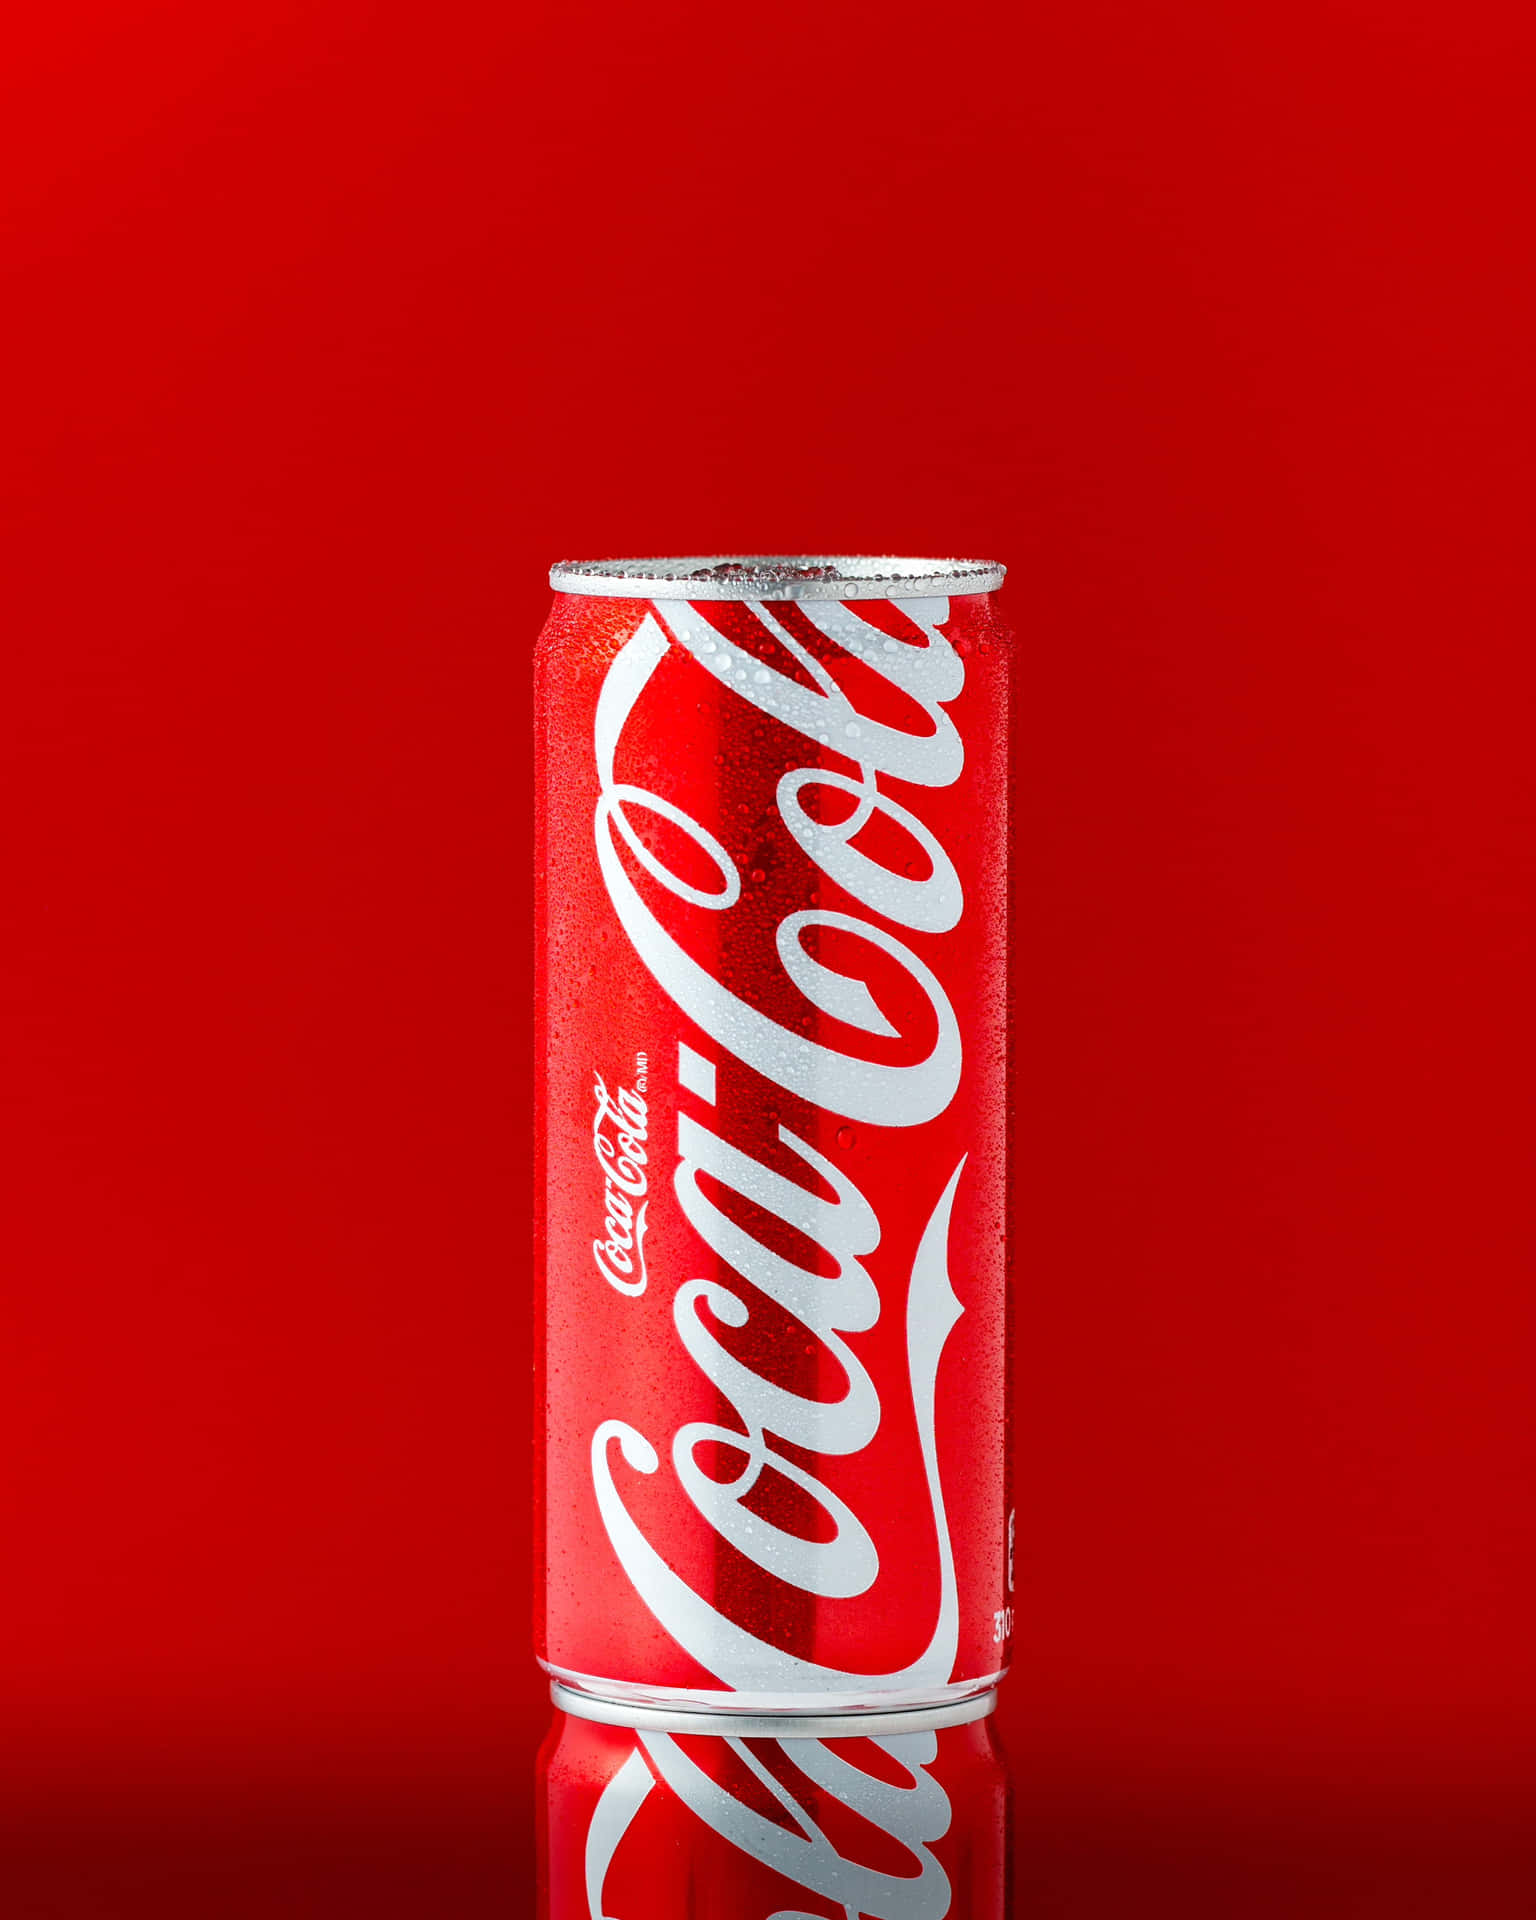 A Can Of Coca Cola On A Red Background